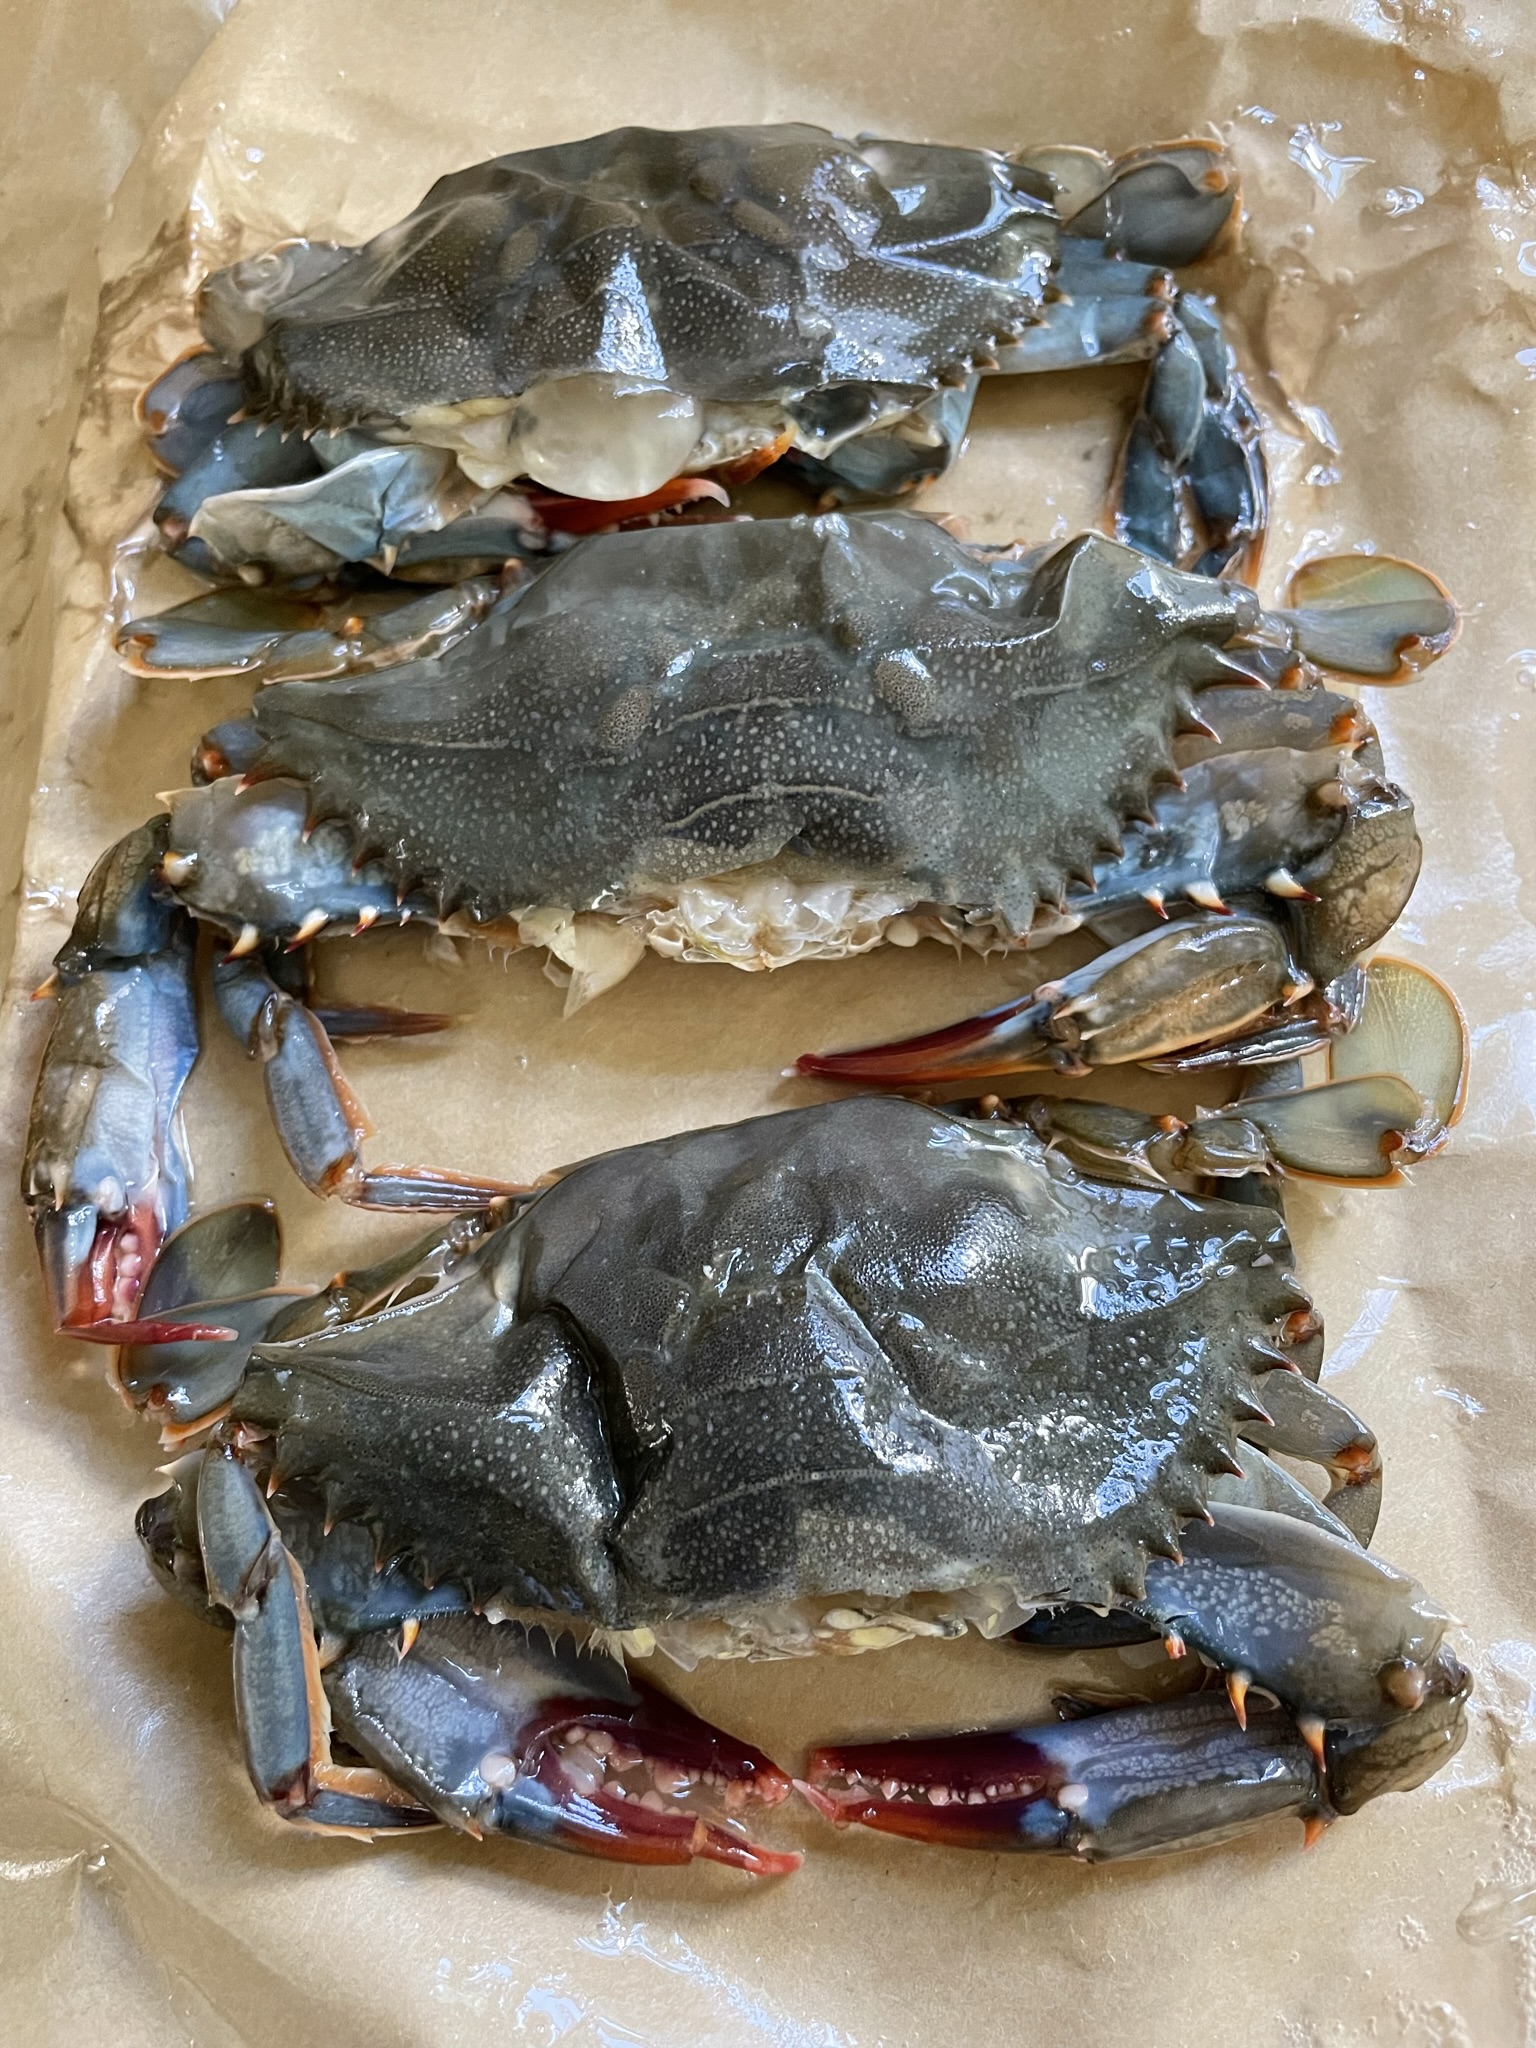 Cleaned soft shell crabs